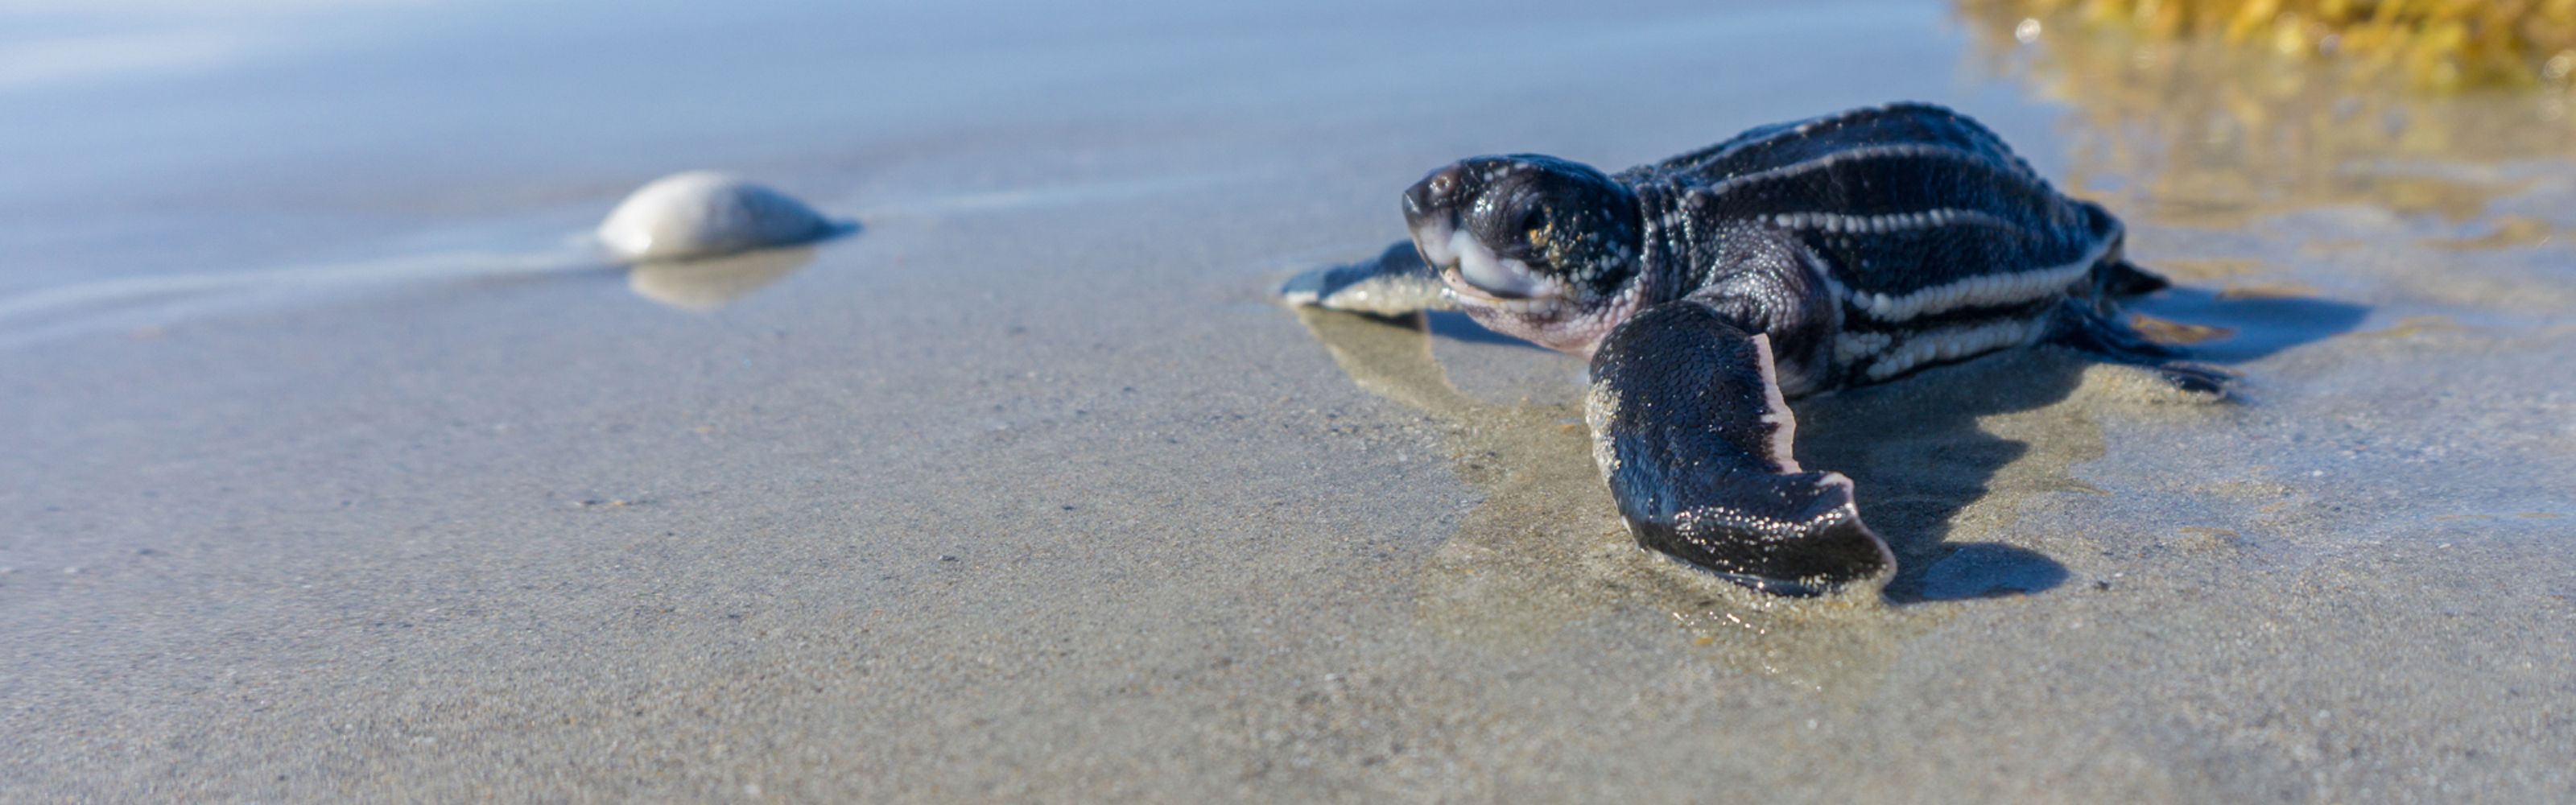 A turtle hatchling moves across a sandy beach.